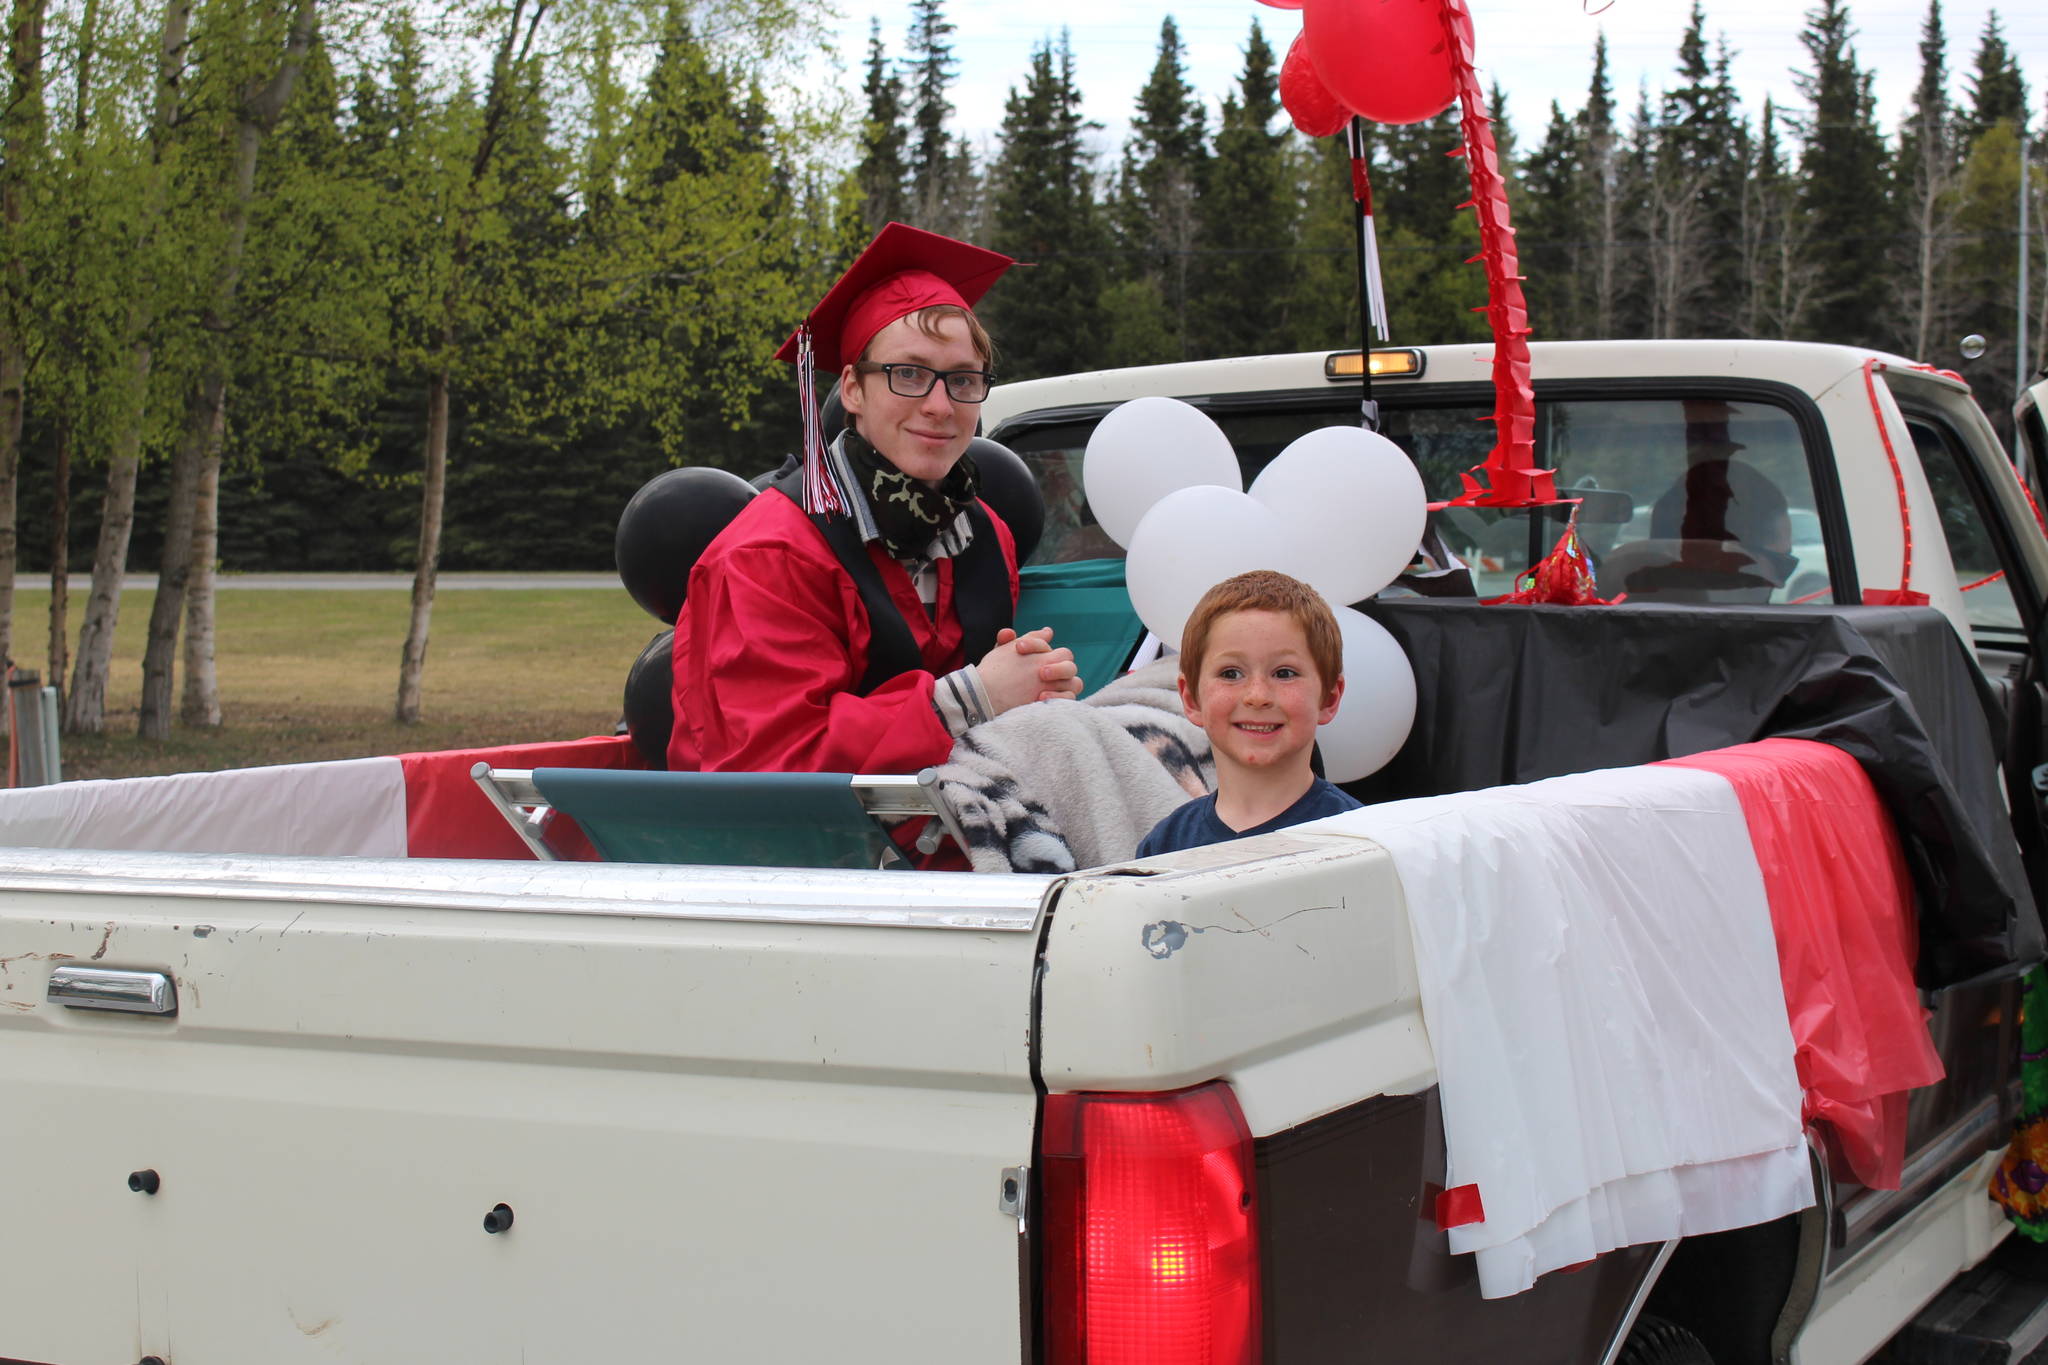 Senior Devin Murphy and his little brother Brody participate in Kenai Central High School’s Class of 2020 Graduation Parade in Kenai, Alaska, on May 20, 2020. (Photo by Brian Mazurek/Peninsula Clarion)